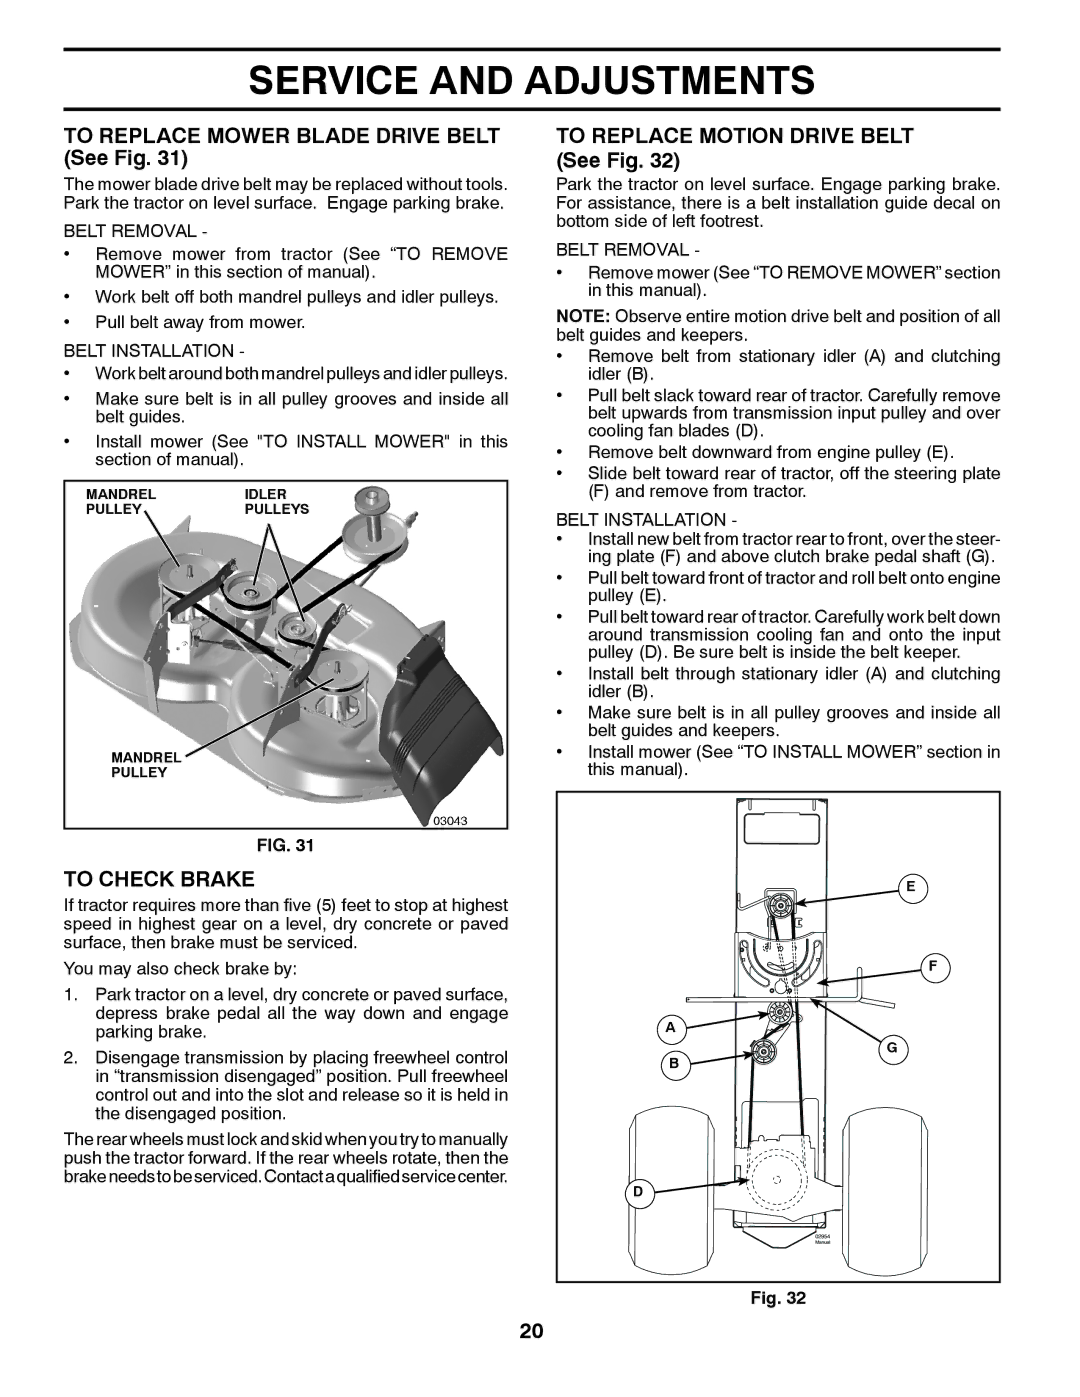 Husqvarna 917.28961 To Replace Mower Blade Drive Belt See Fig, To Check Brake, To Replace Motion Drive Belt See Fig 